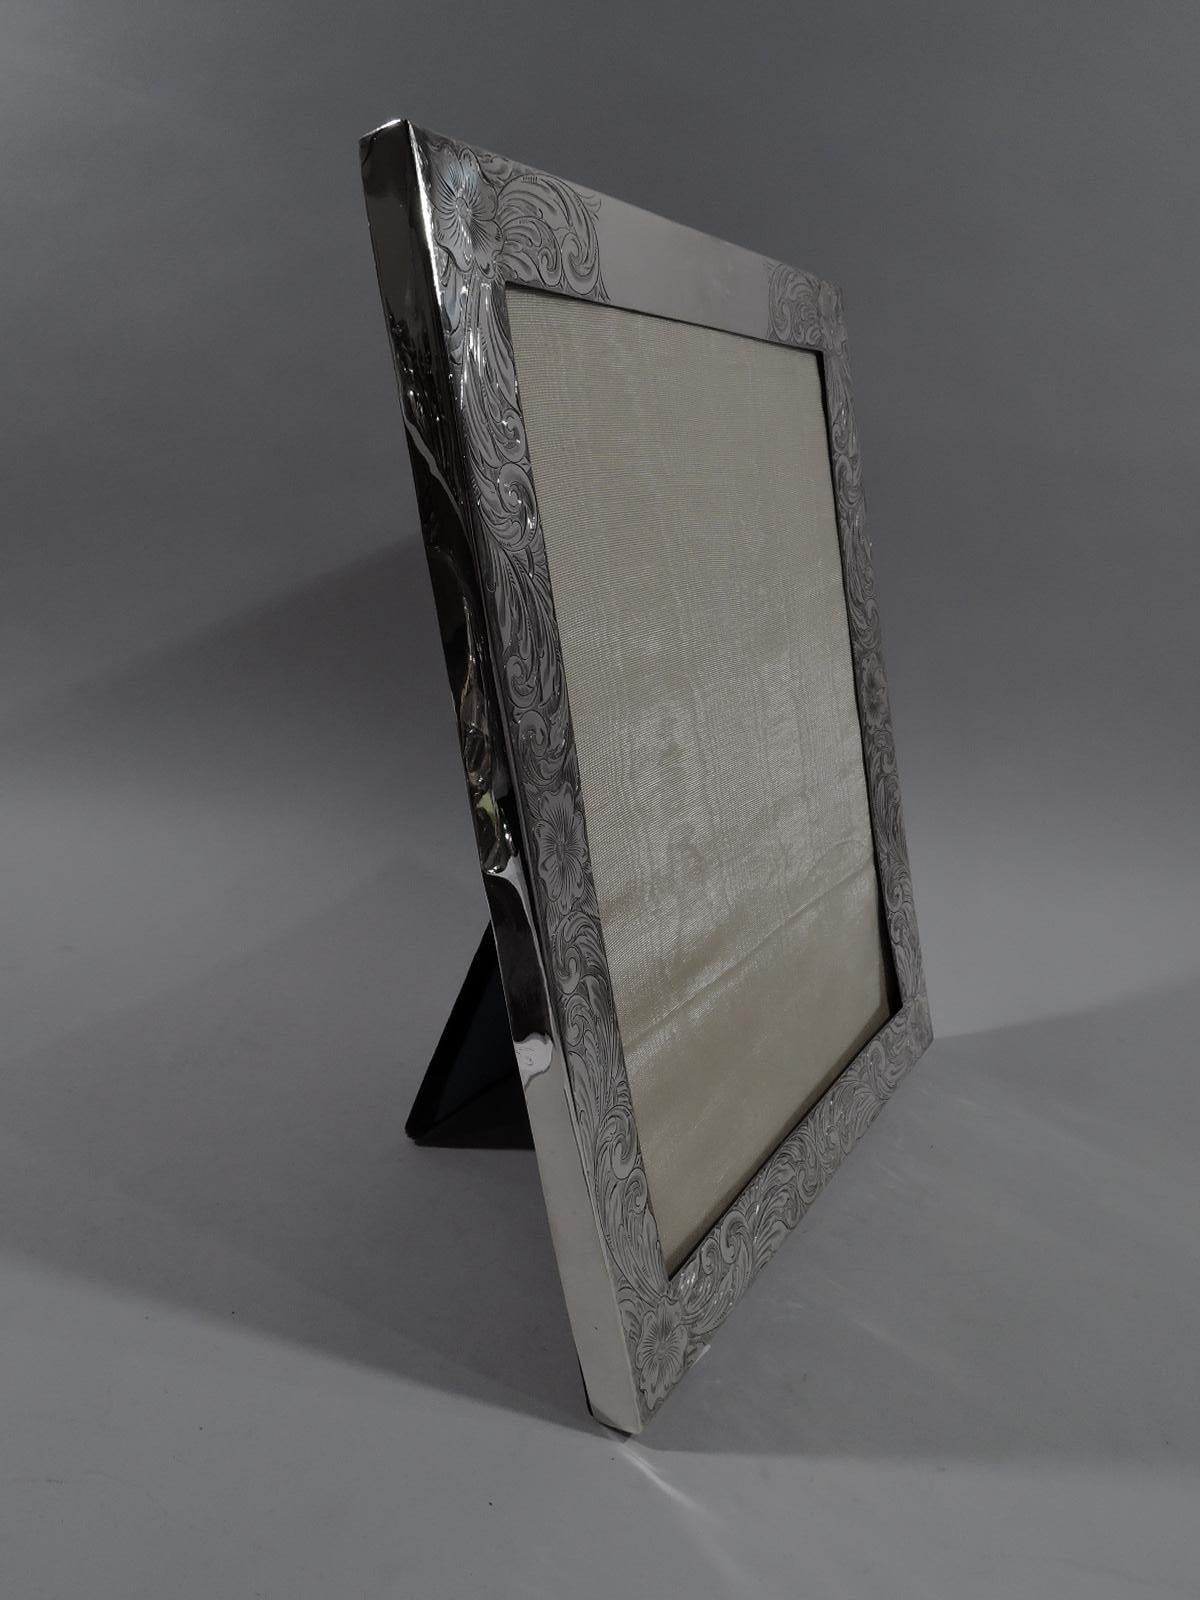 Large American Art Nouveau sterling silver picture frame. Rectangular window in flat surround engraved dense and dynamic scrolls and flowers; sides plain. Top rail has shaped cartouche (vacant). With glass, silk lining, and velvet back and hinged